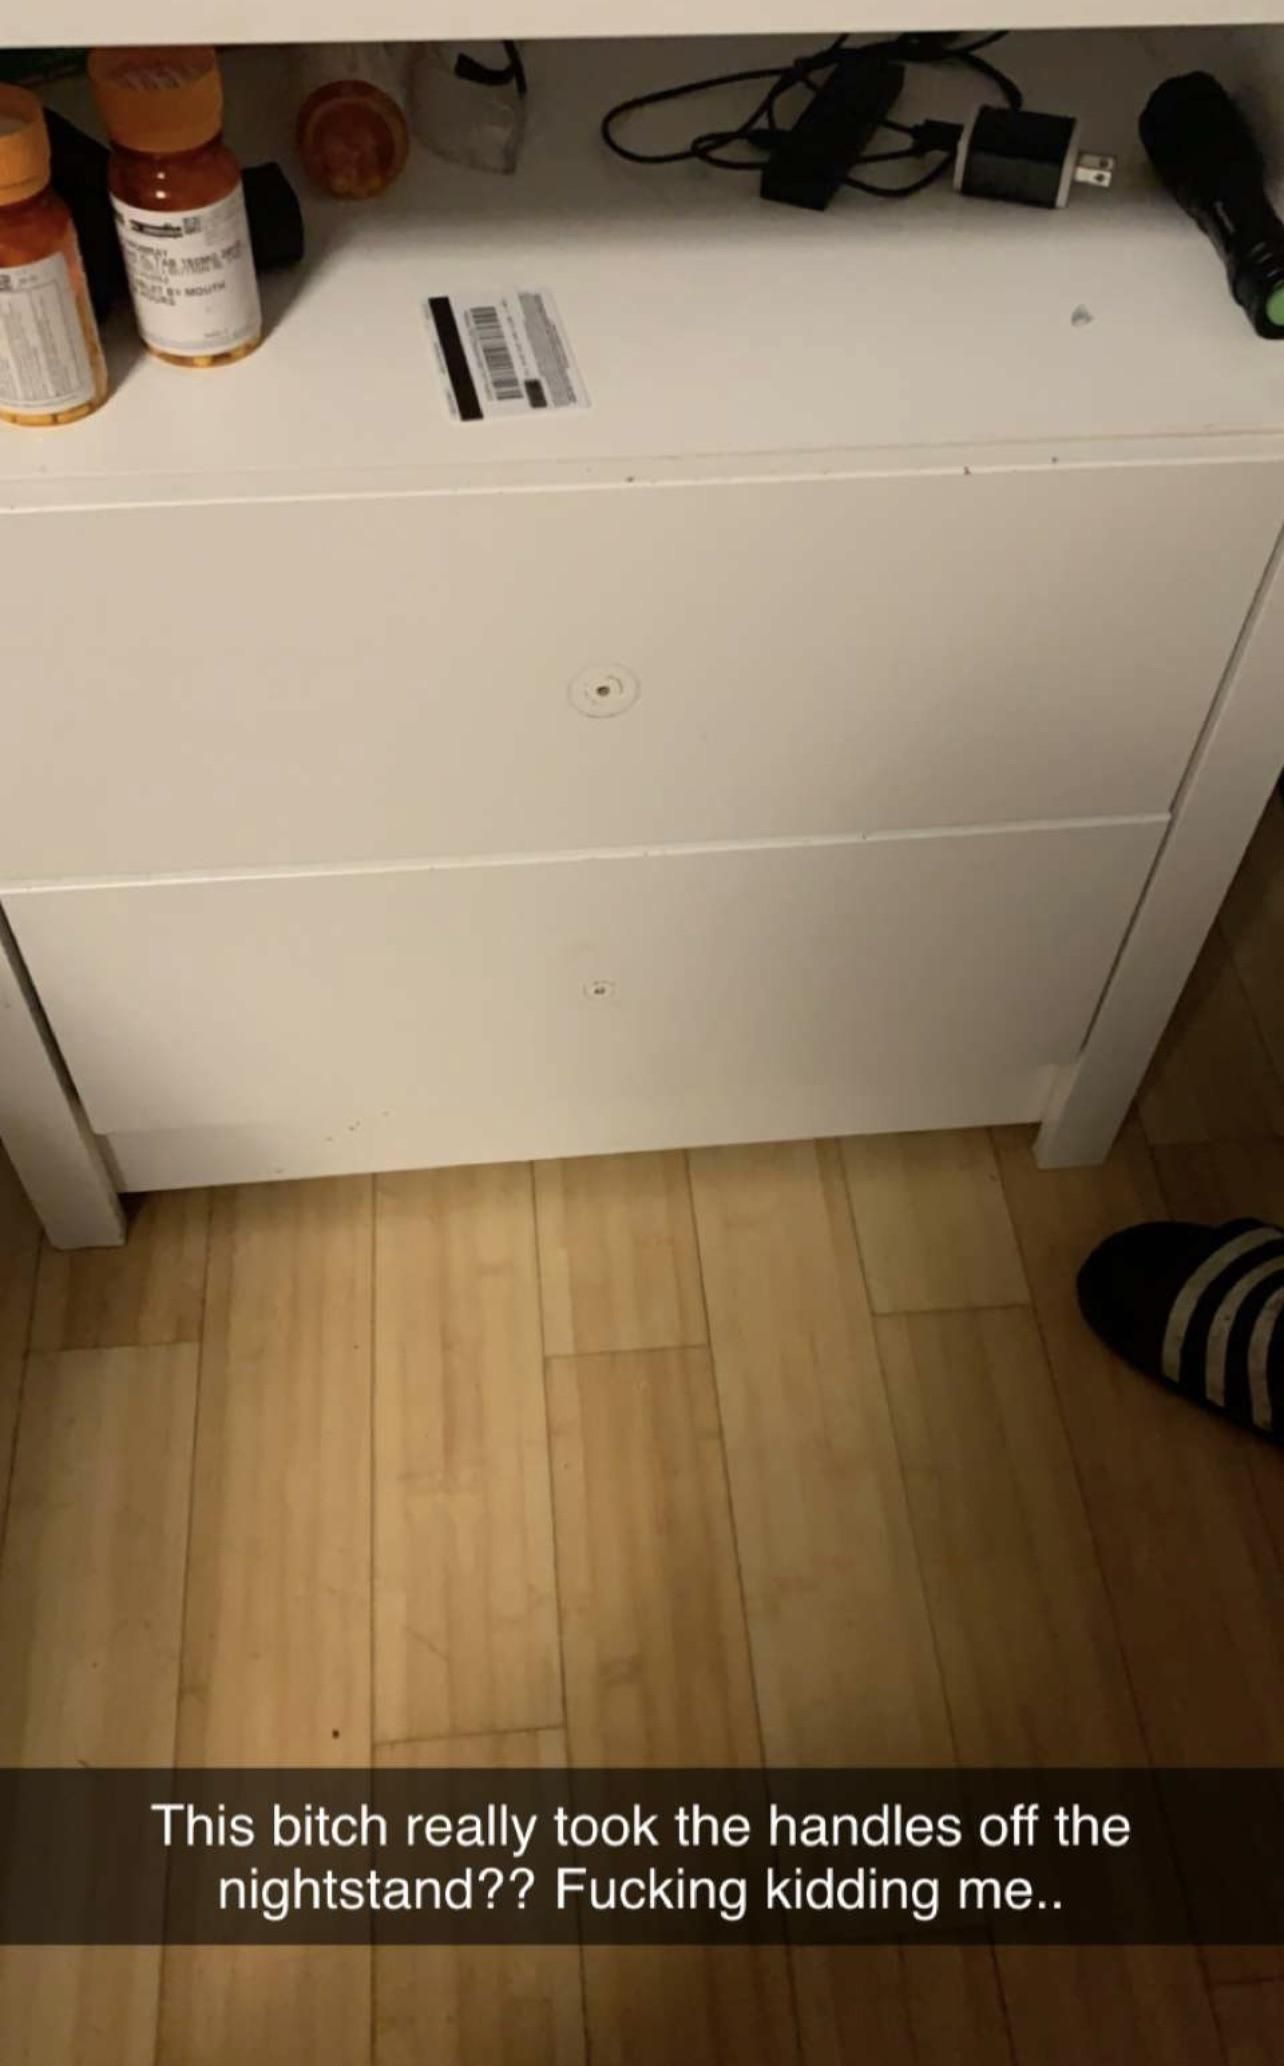 My friends girlfriend moved out and took everything, including the drawer handles